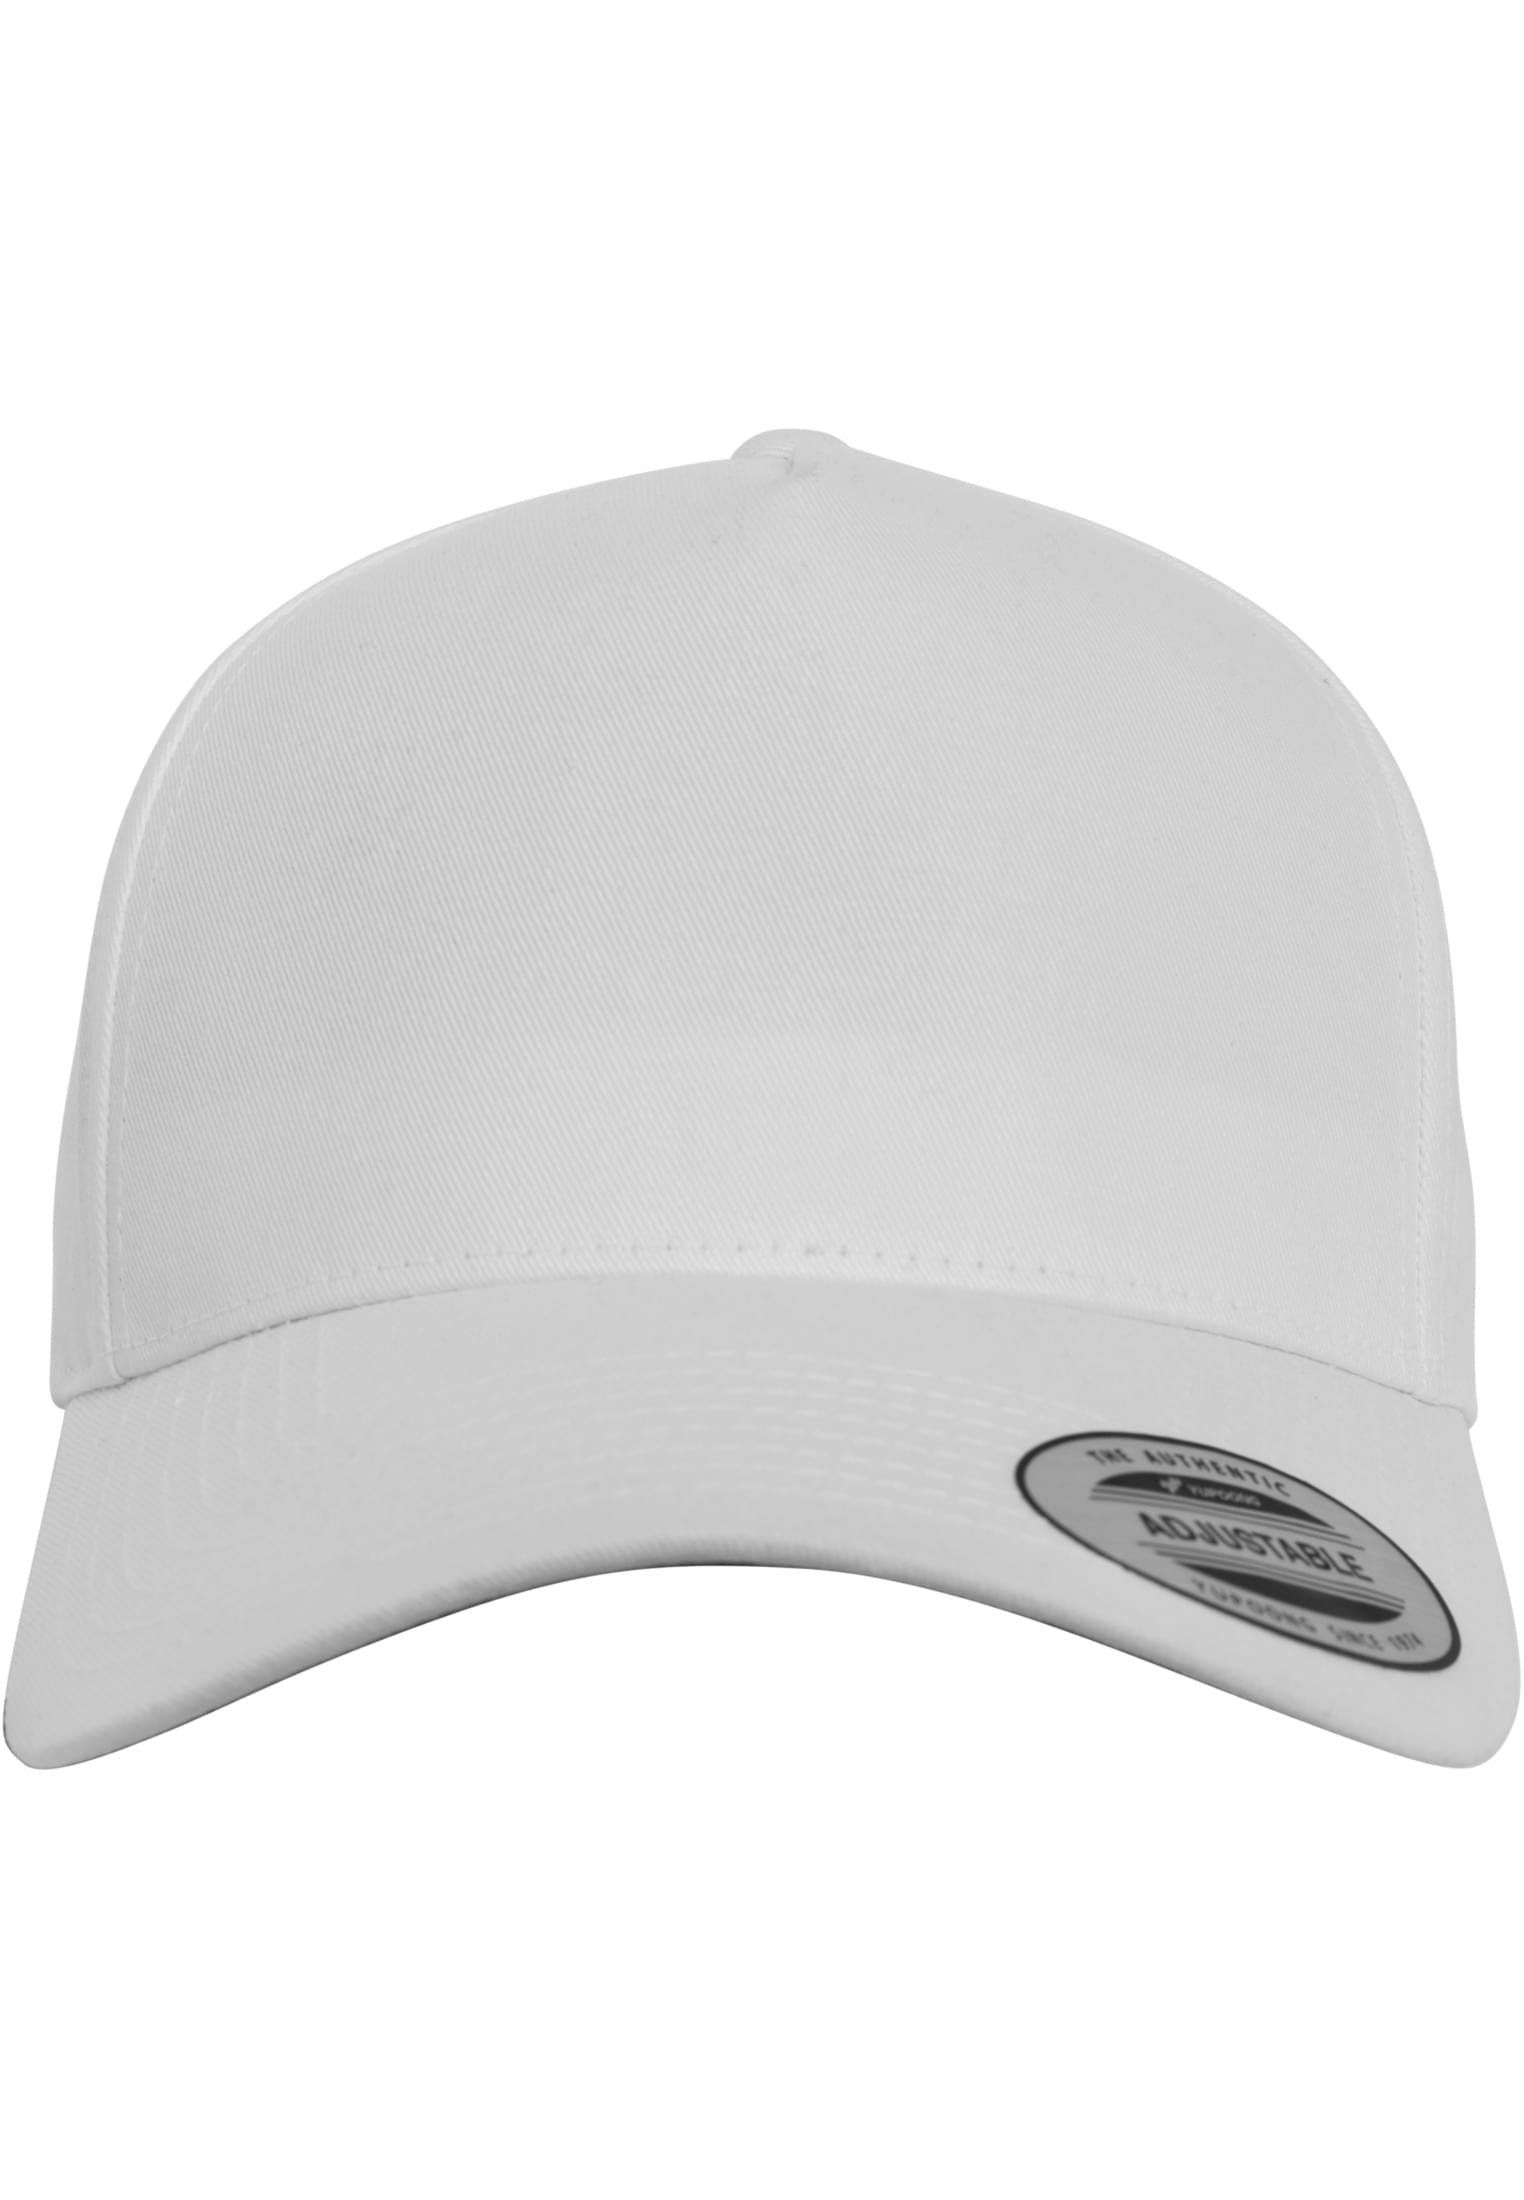 5-panel curved classic snapback white